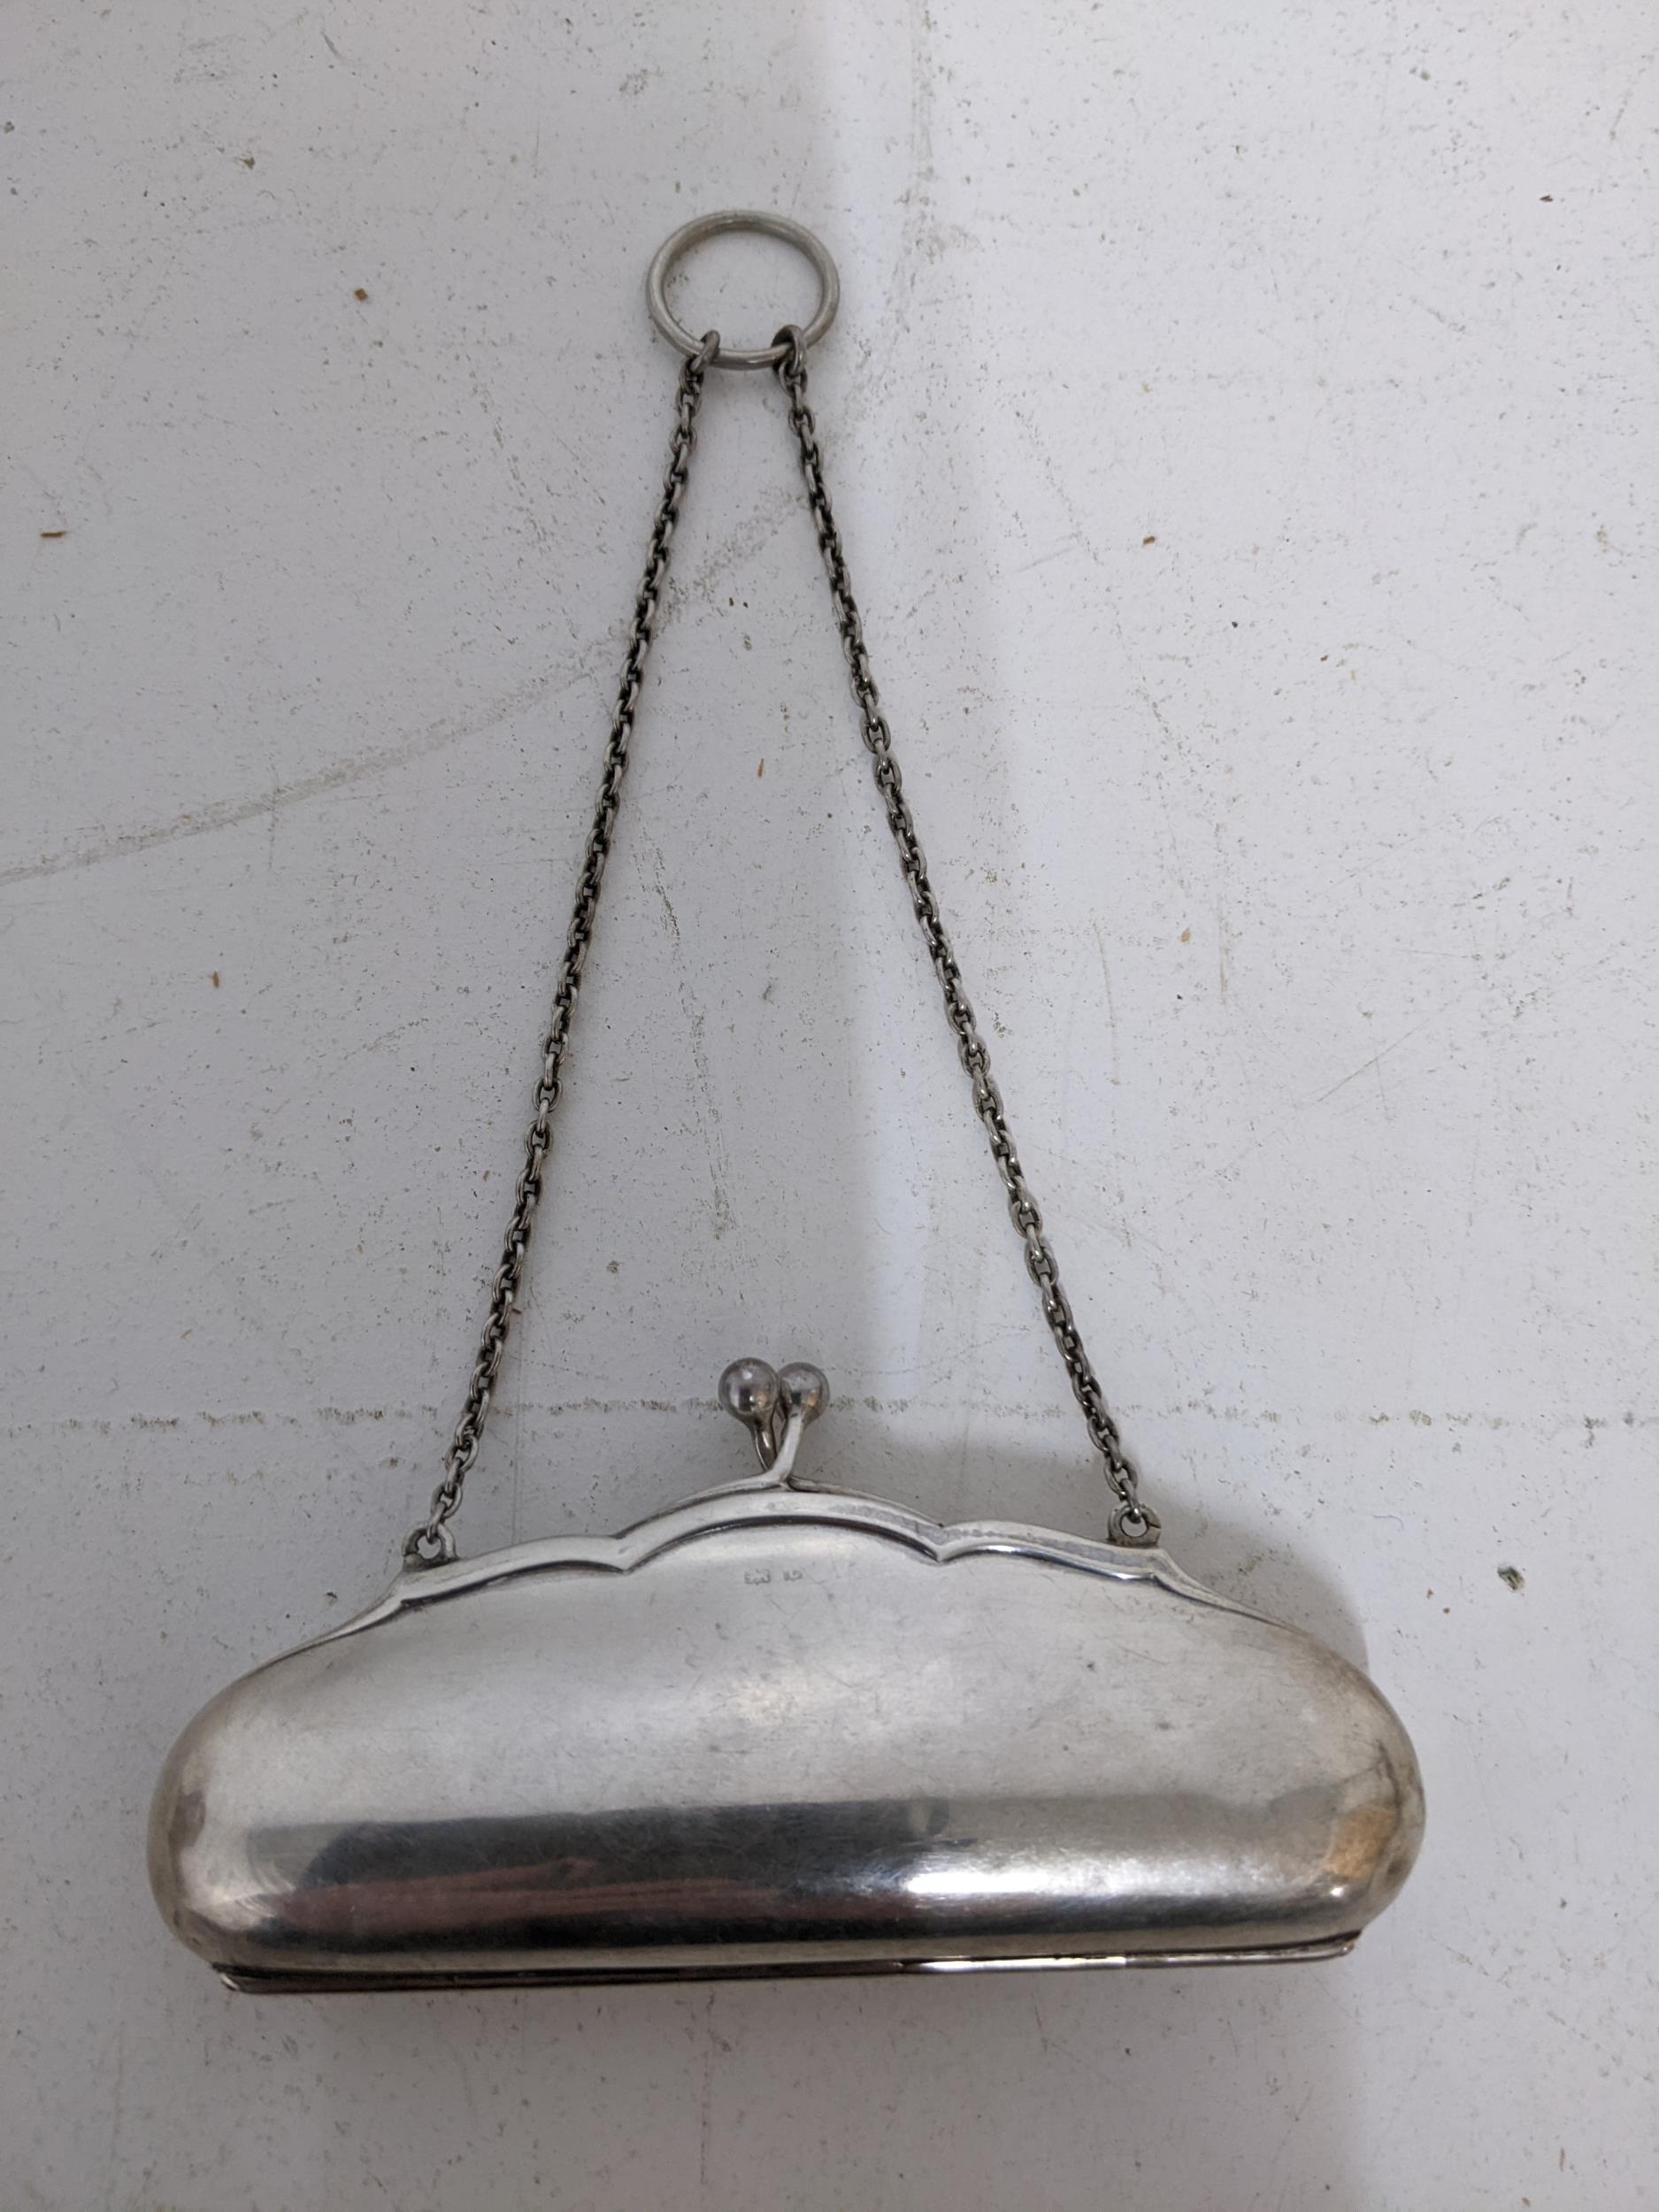 A George V silver ladies purse with leather fitted interior on a chain and suspension ring, - Image 2 of 3